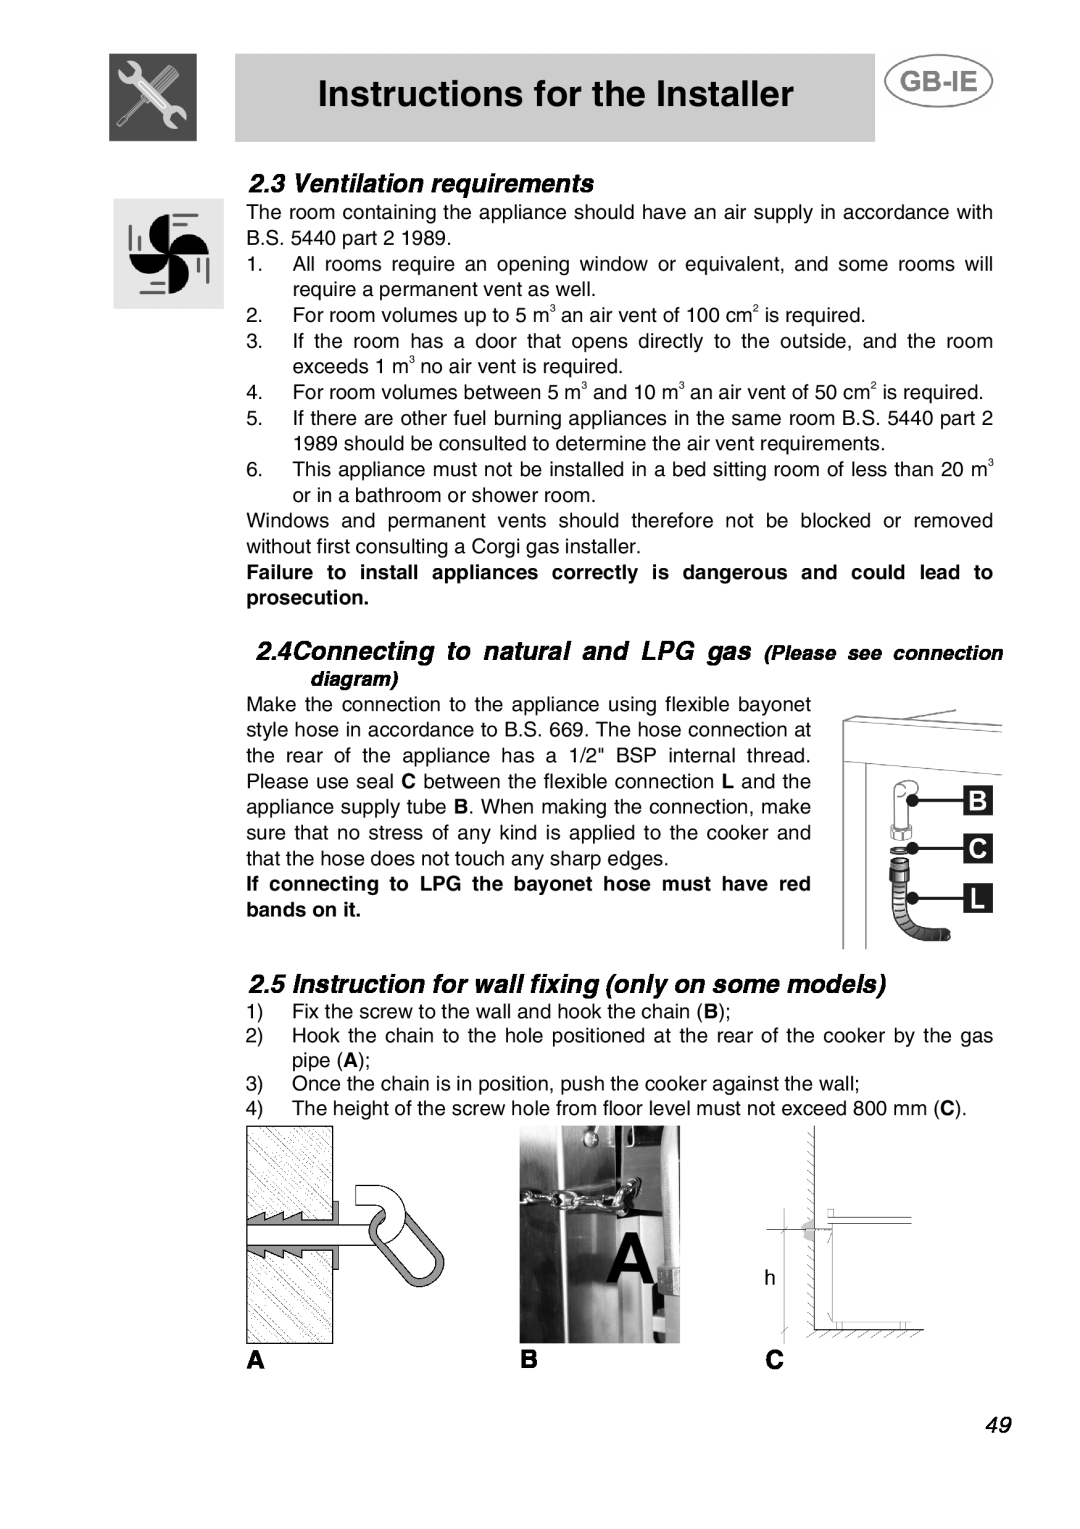 Smeg A5-6 manual Ventilation requirements, 2.4Connecting to natural and LPG gas Please see connection, diagram 